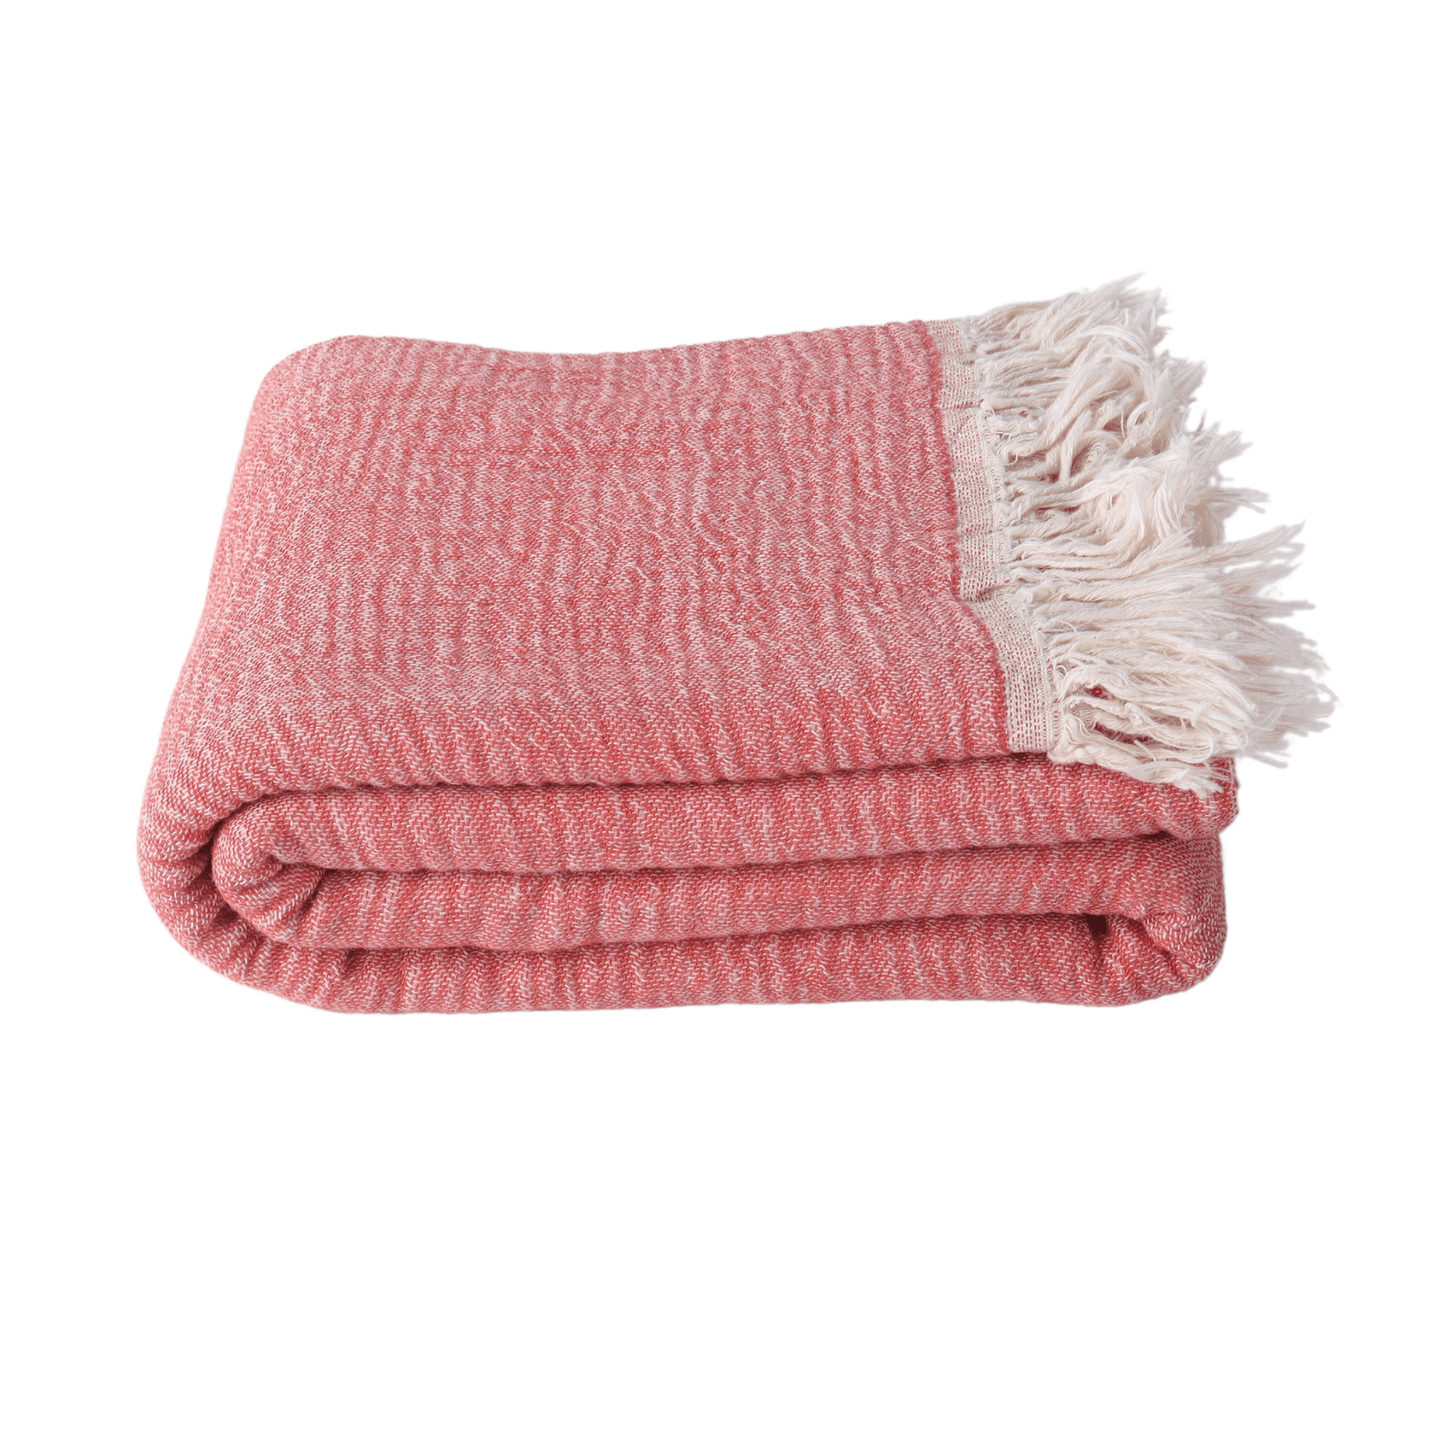 Muslin Towels for Adults rose